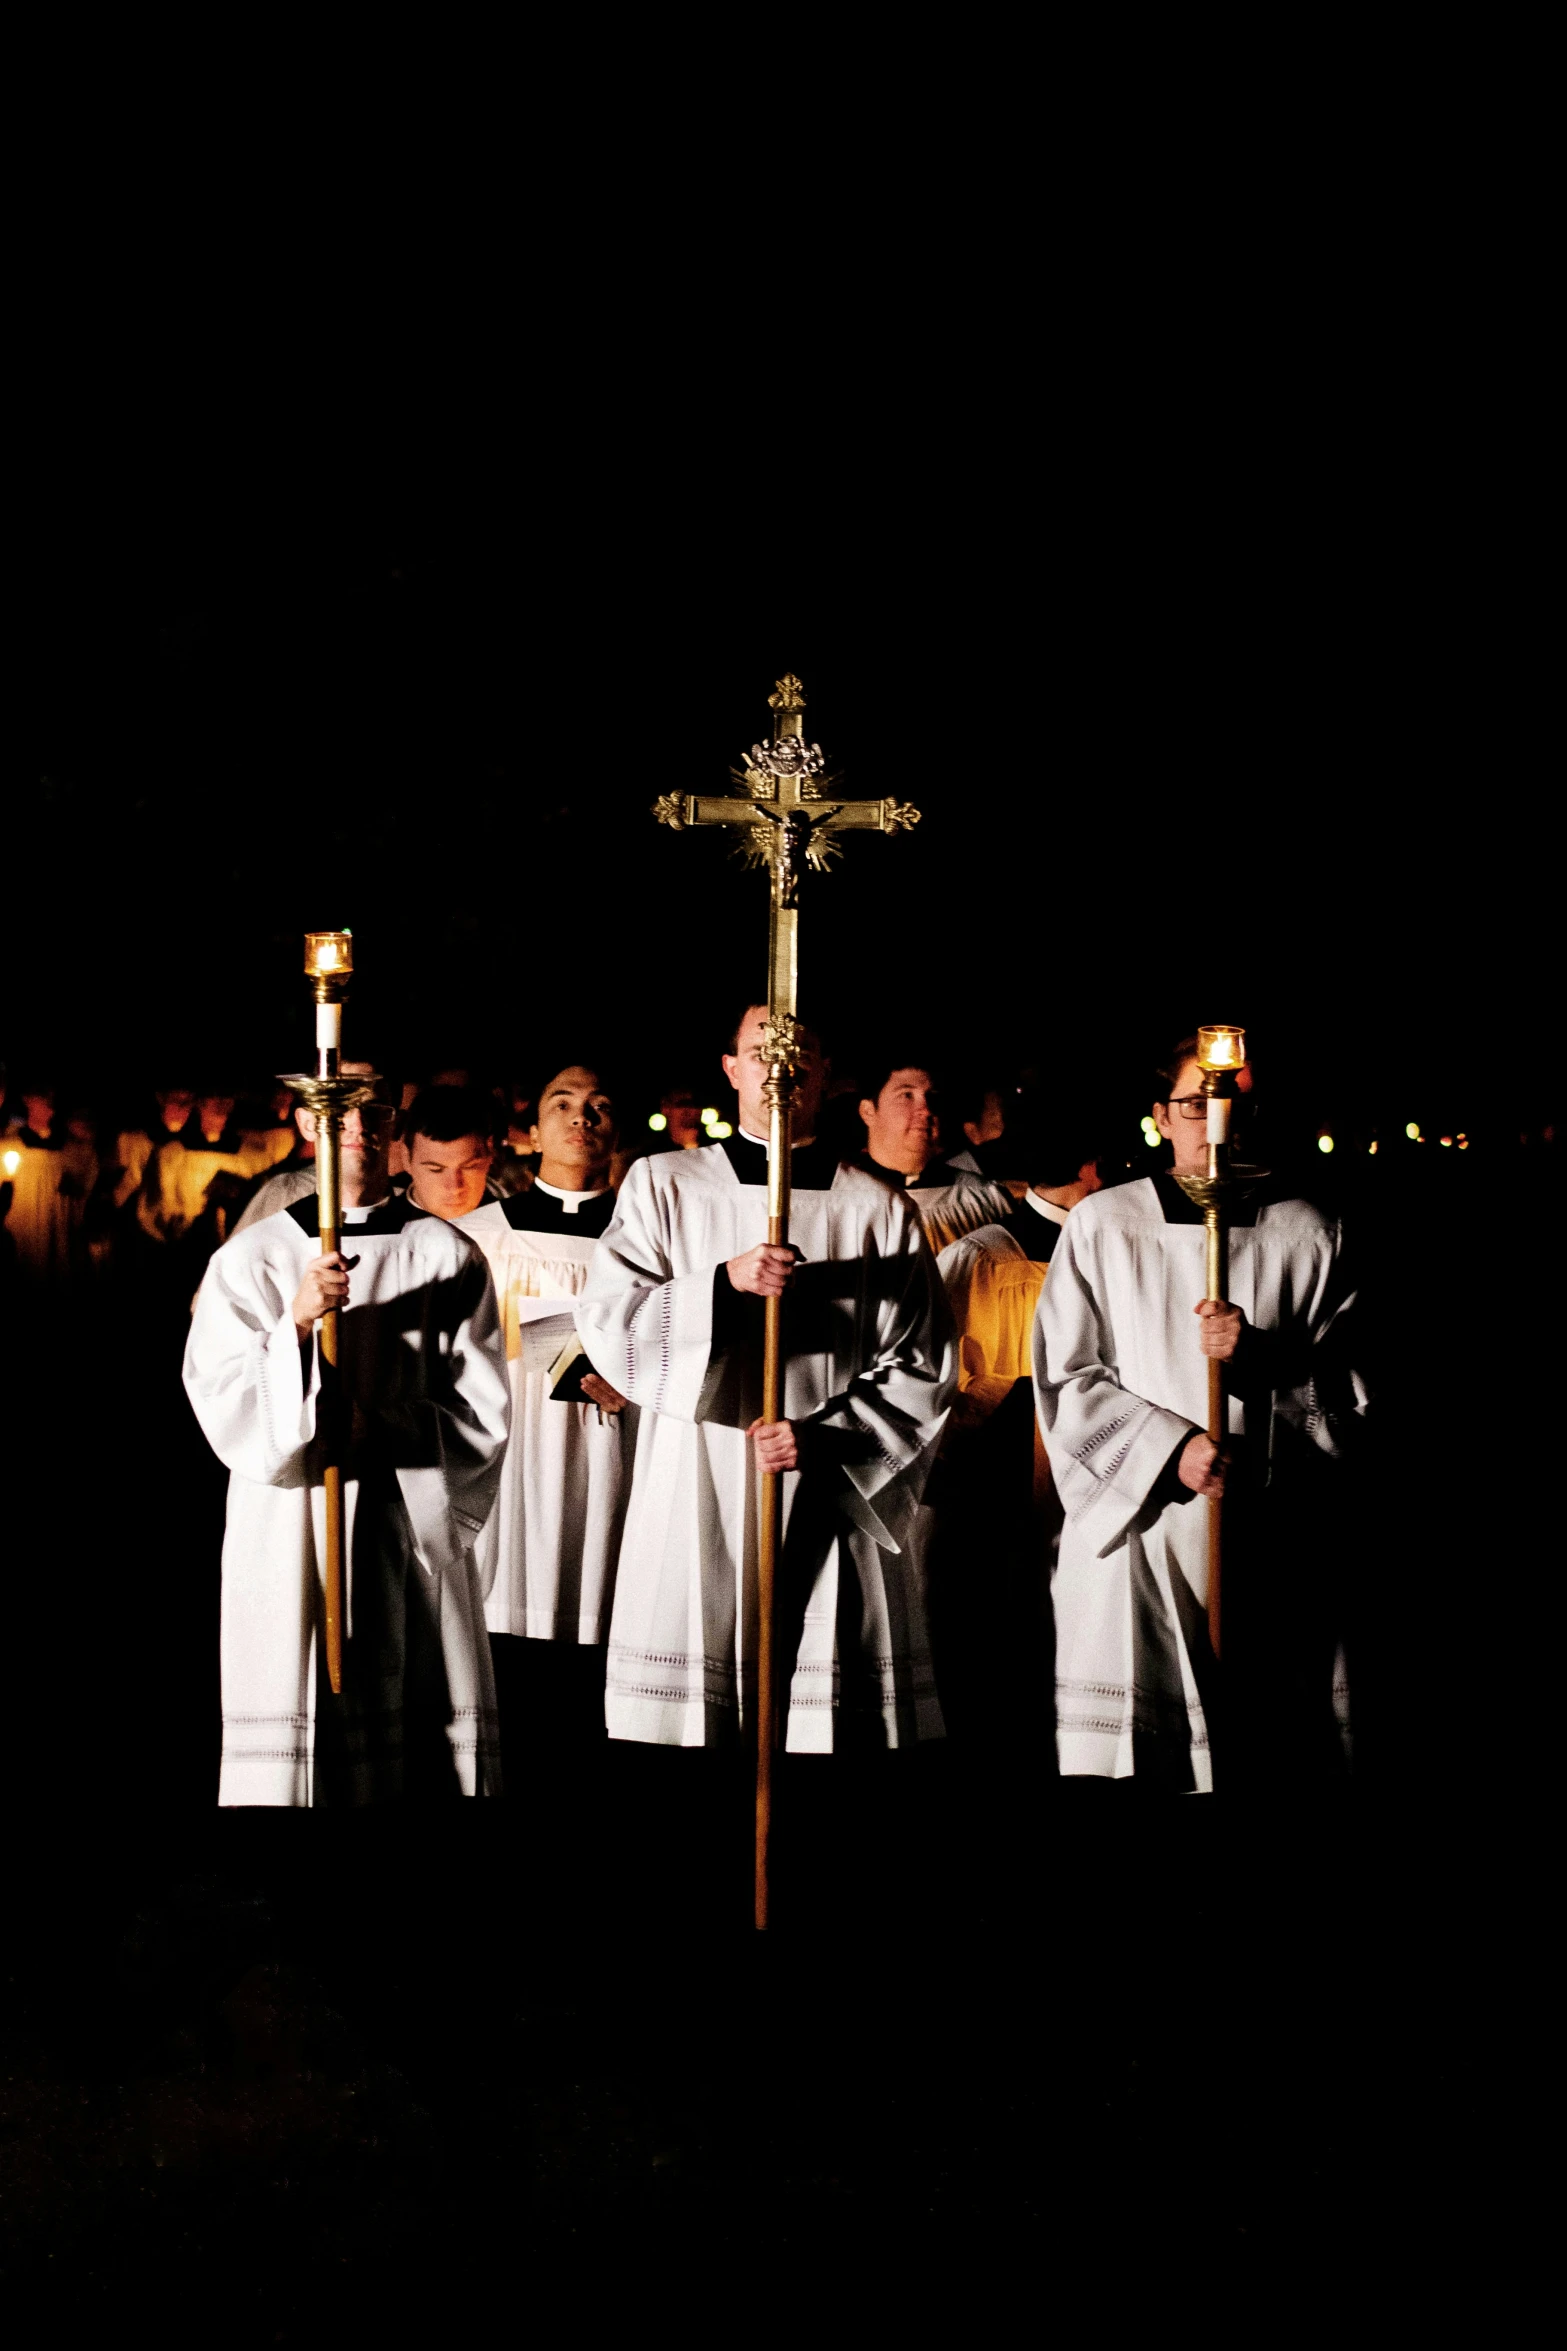 men in white robes holding torches while standing by a cross